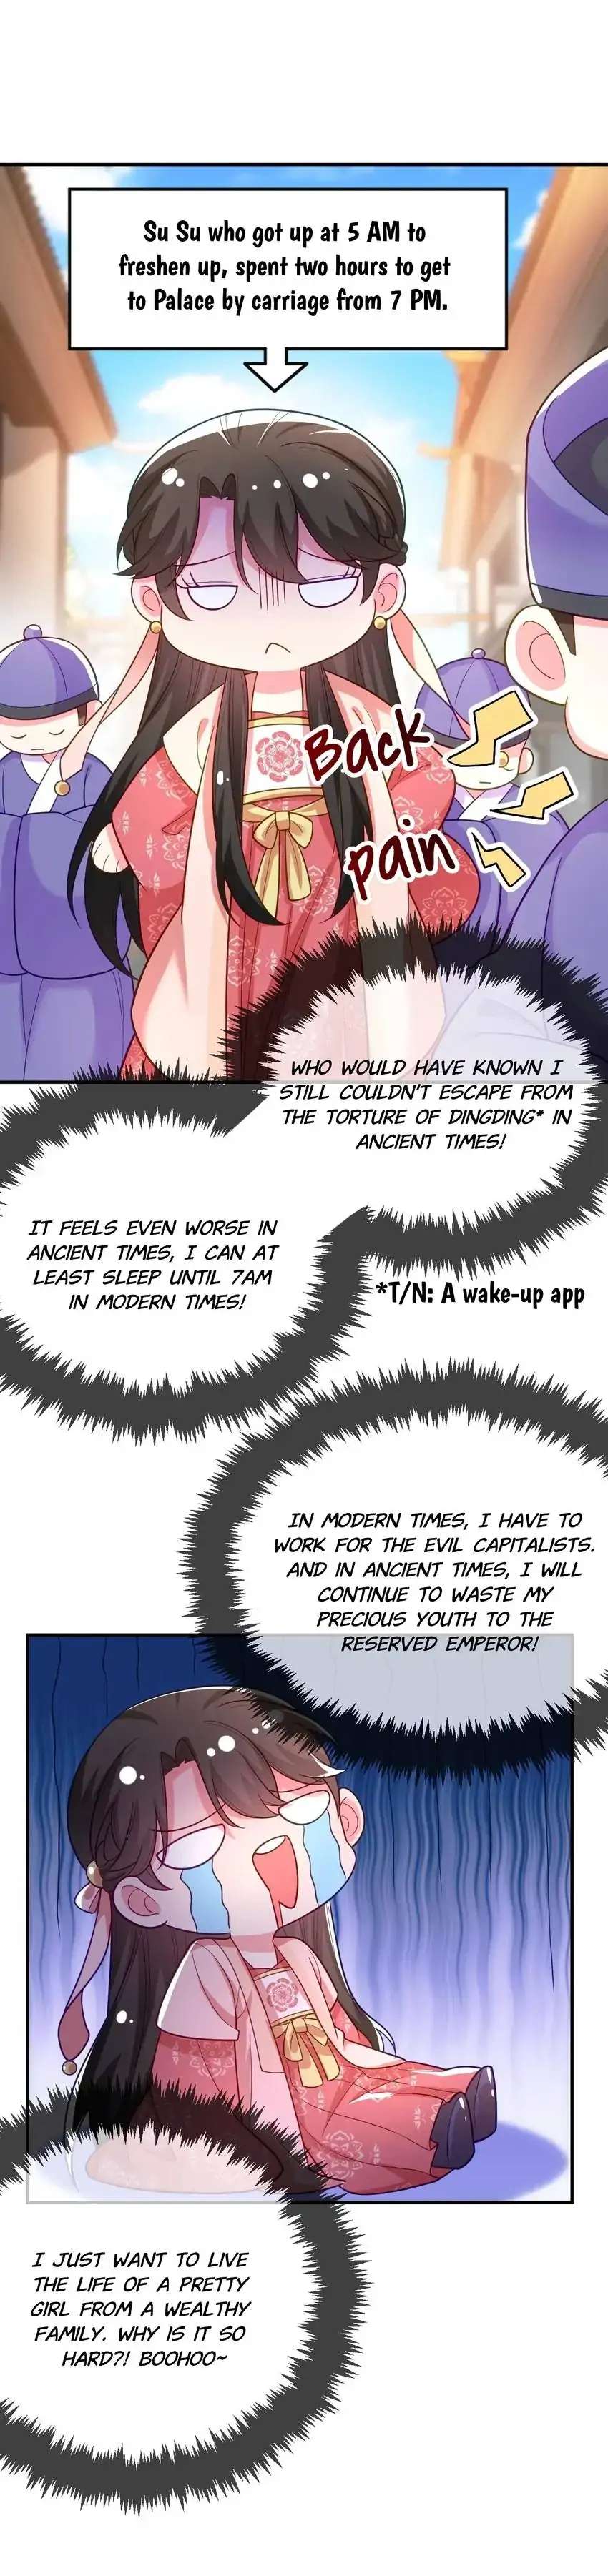 Miss Lover Tamer - Page 2